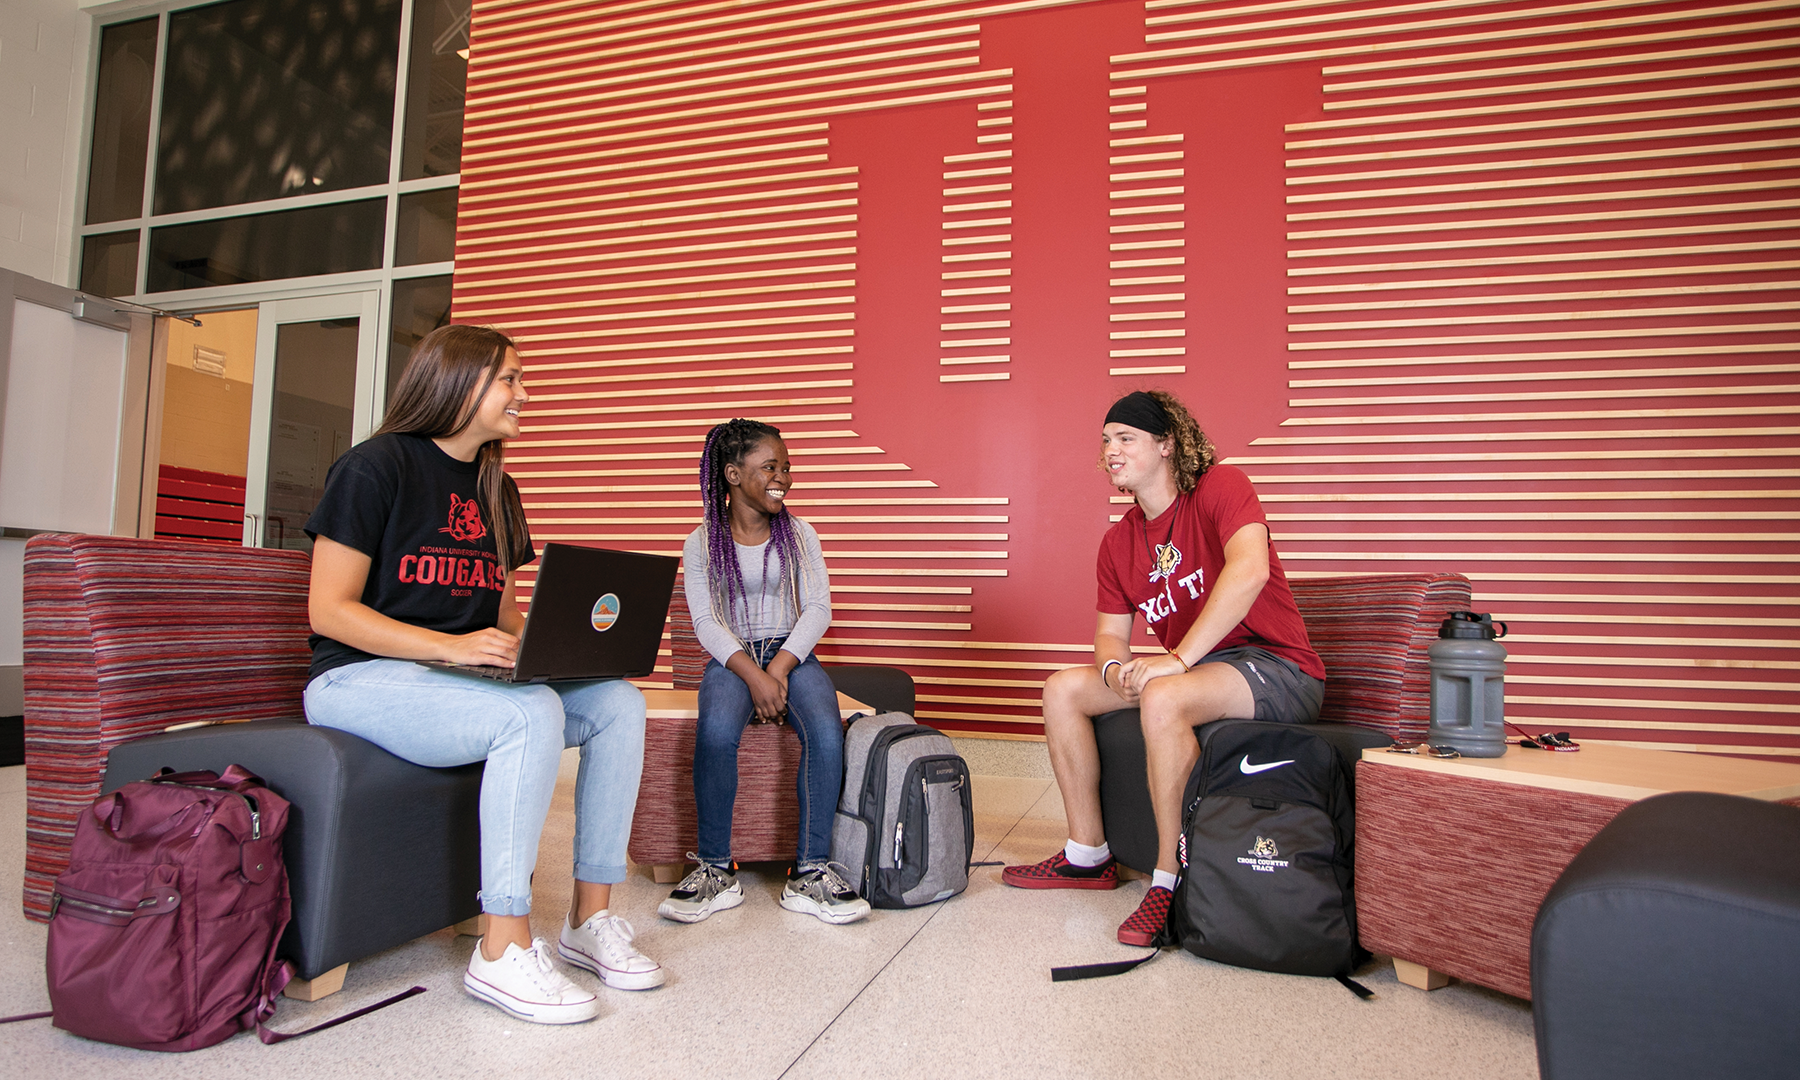 two female and one male student sitting in front of an IU trident wall in the Student Activities and Events Center lobby